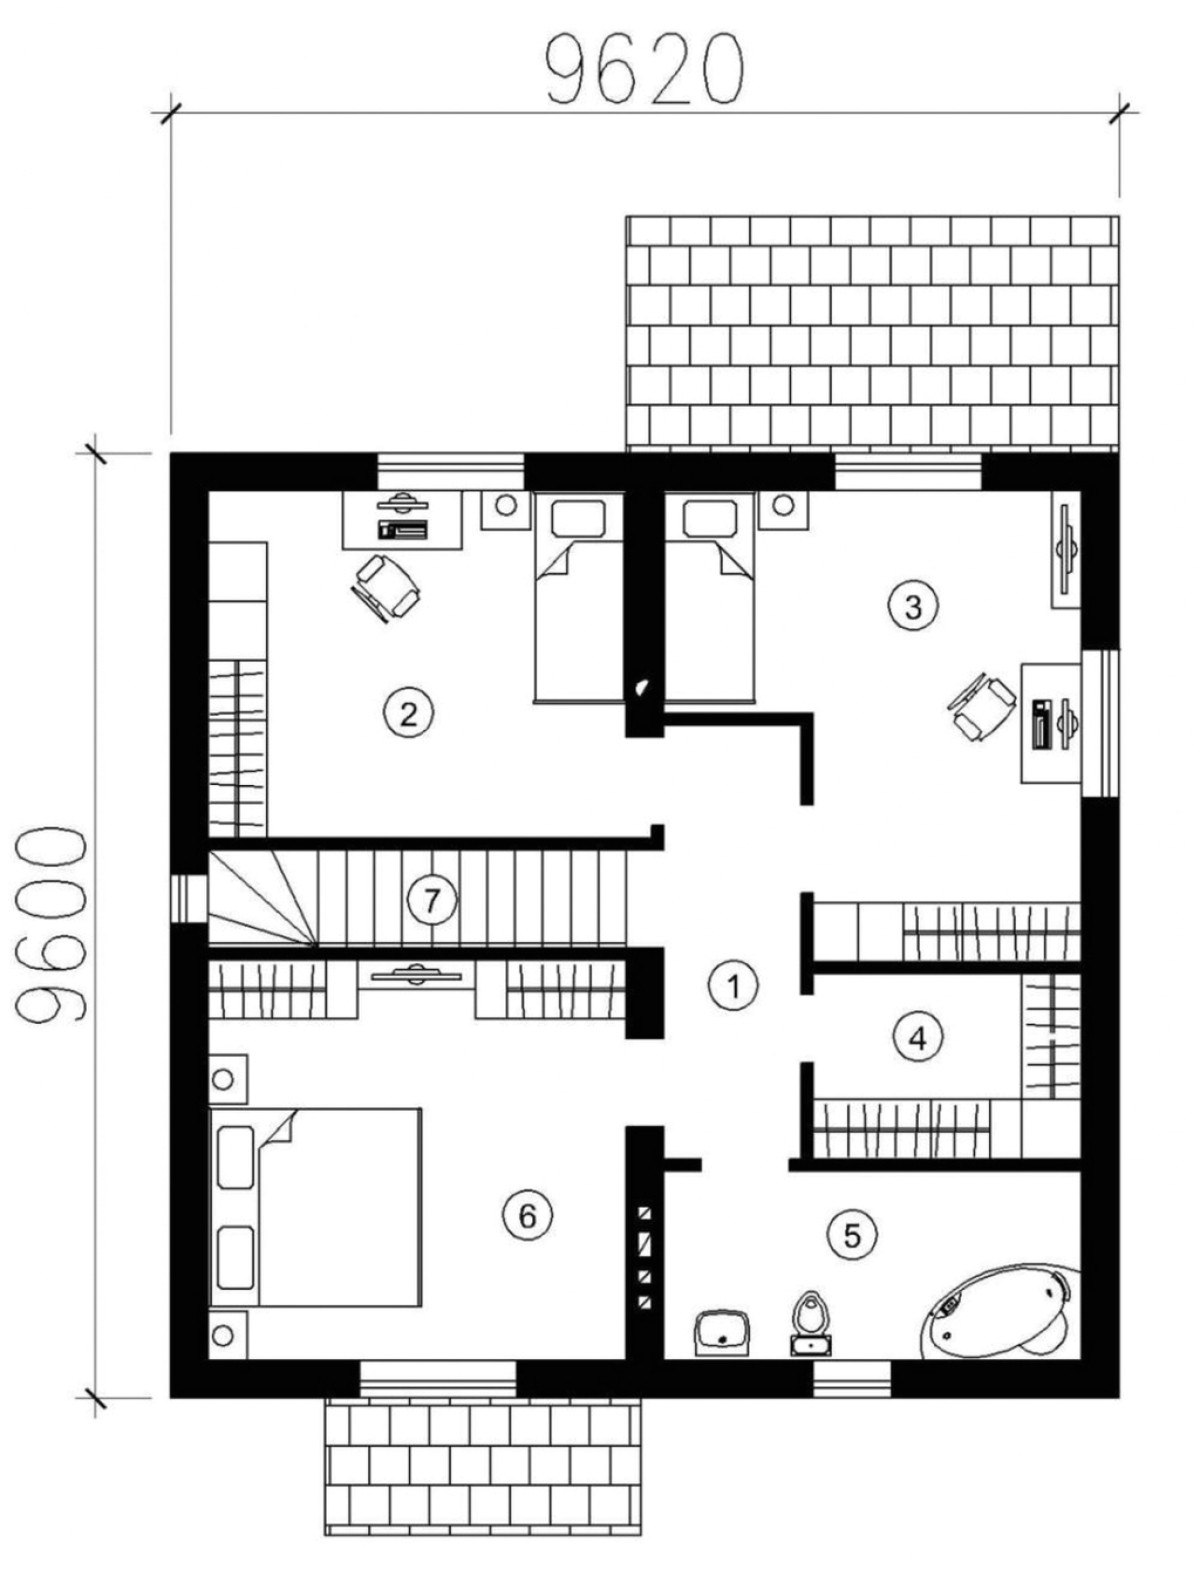 plans for sale in h beautiful small modern house designs and floor plans small modern house plans for sale small modern house plans under 1000 sq ft modern house designs